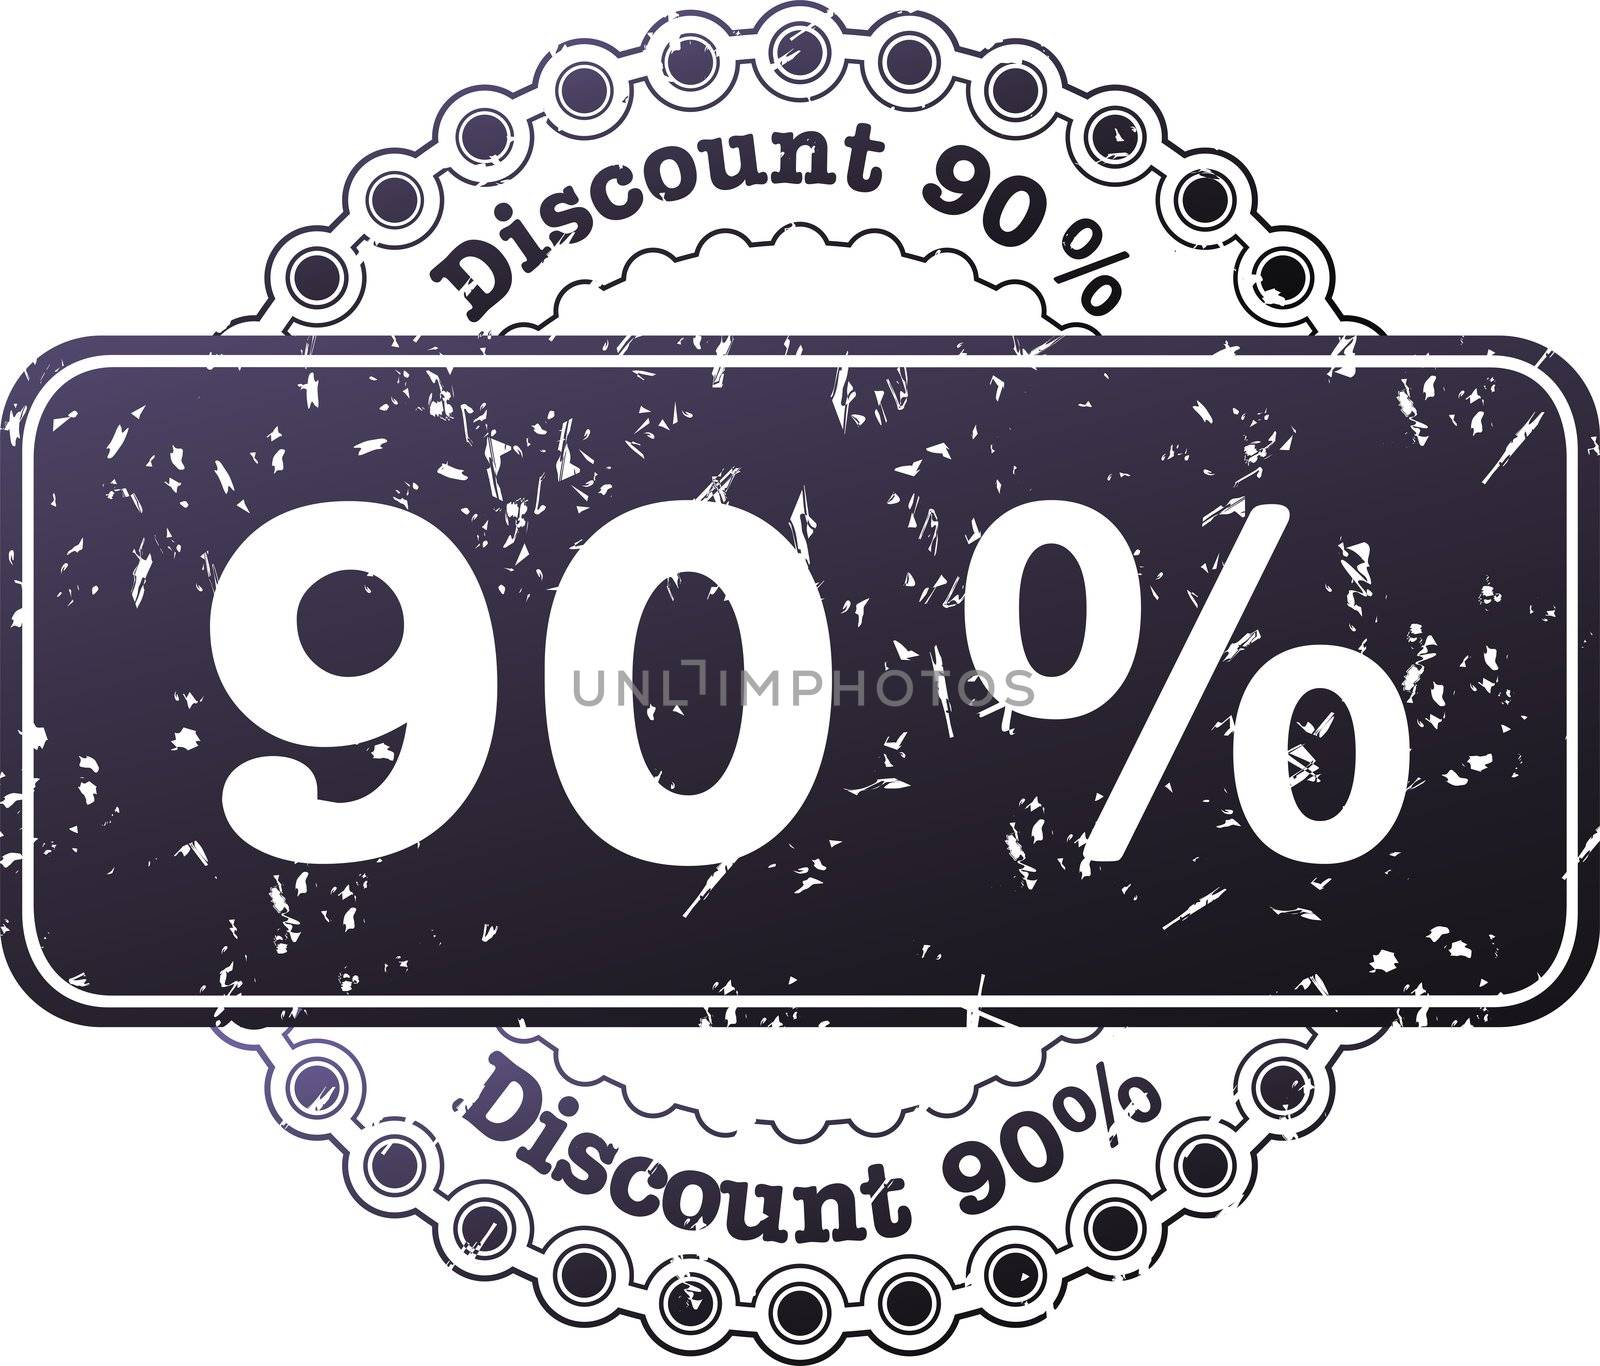 Stamp Discount ninety percent by ard1